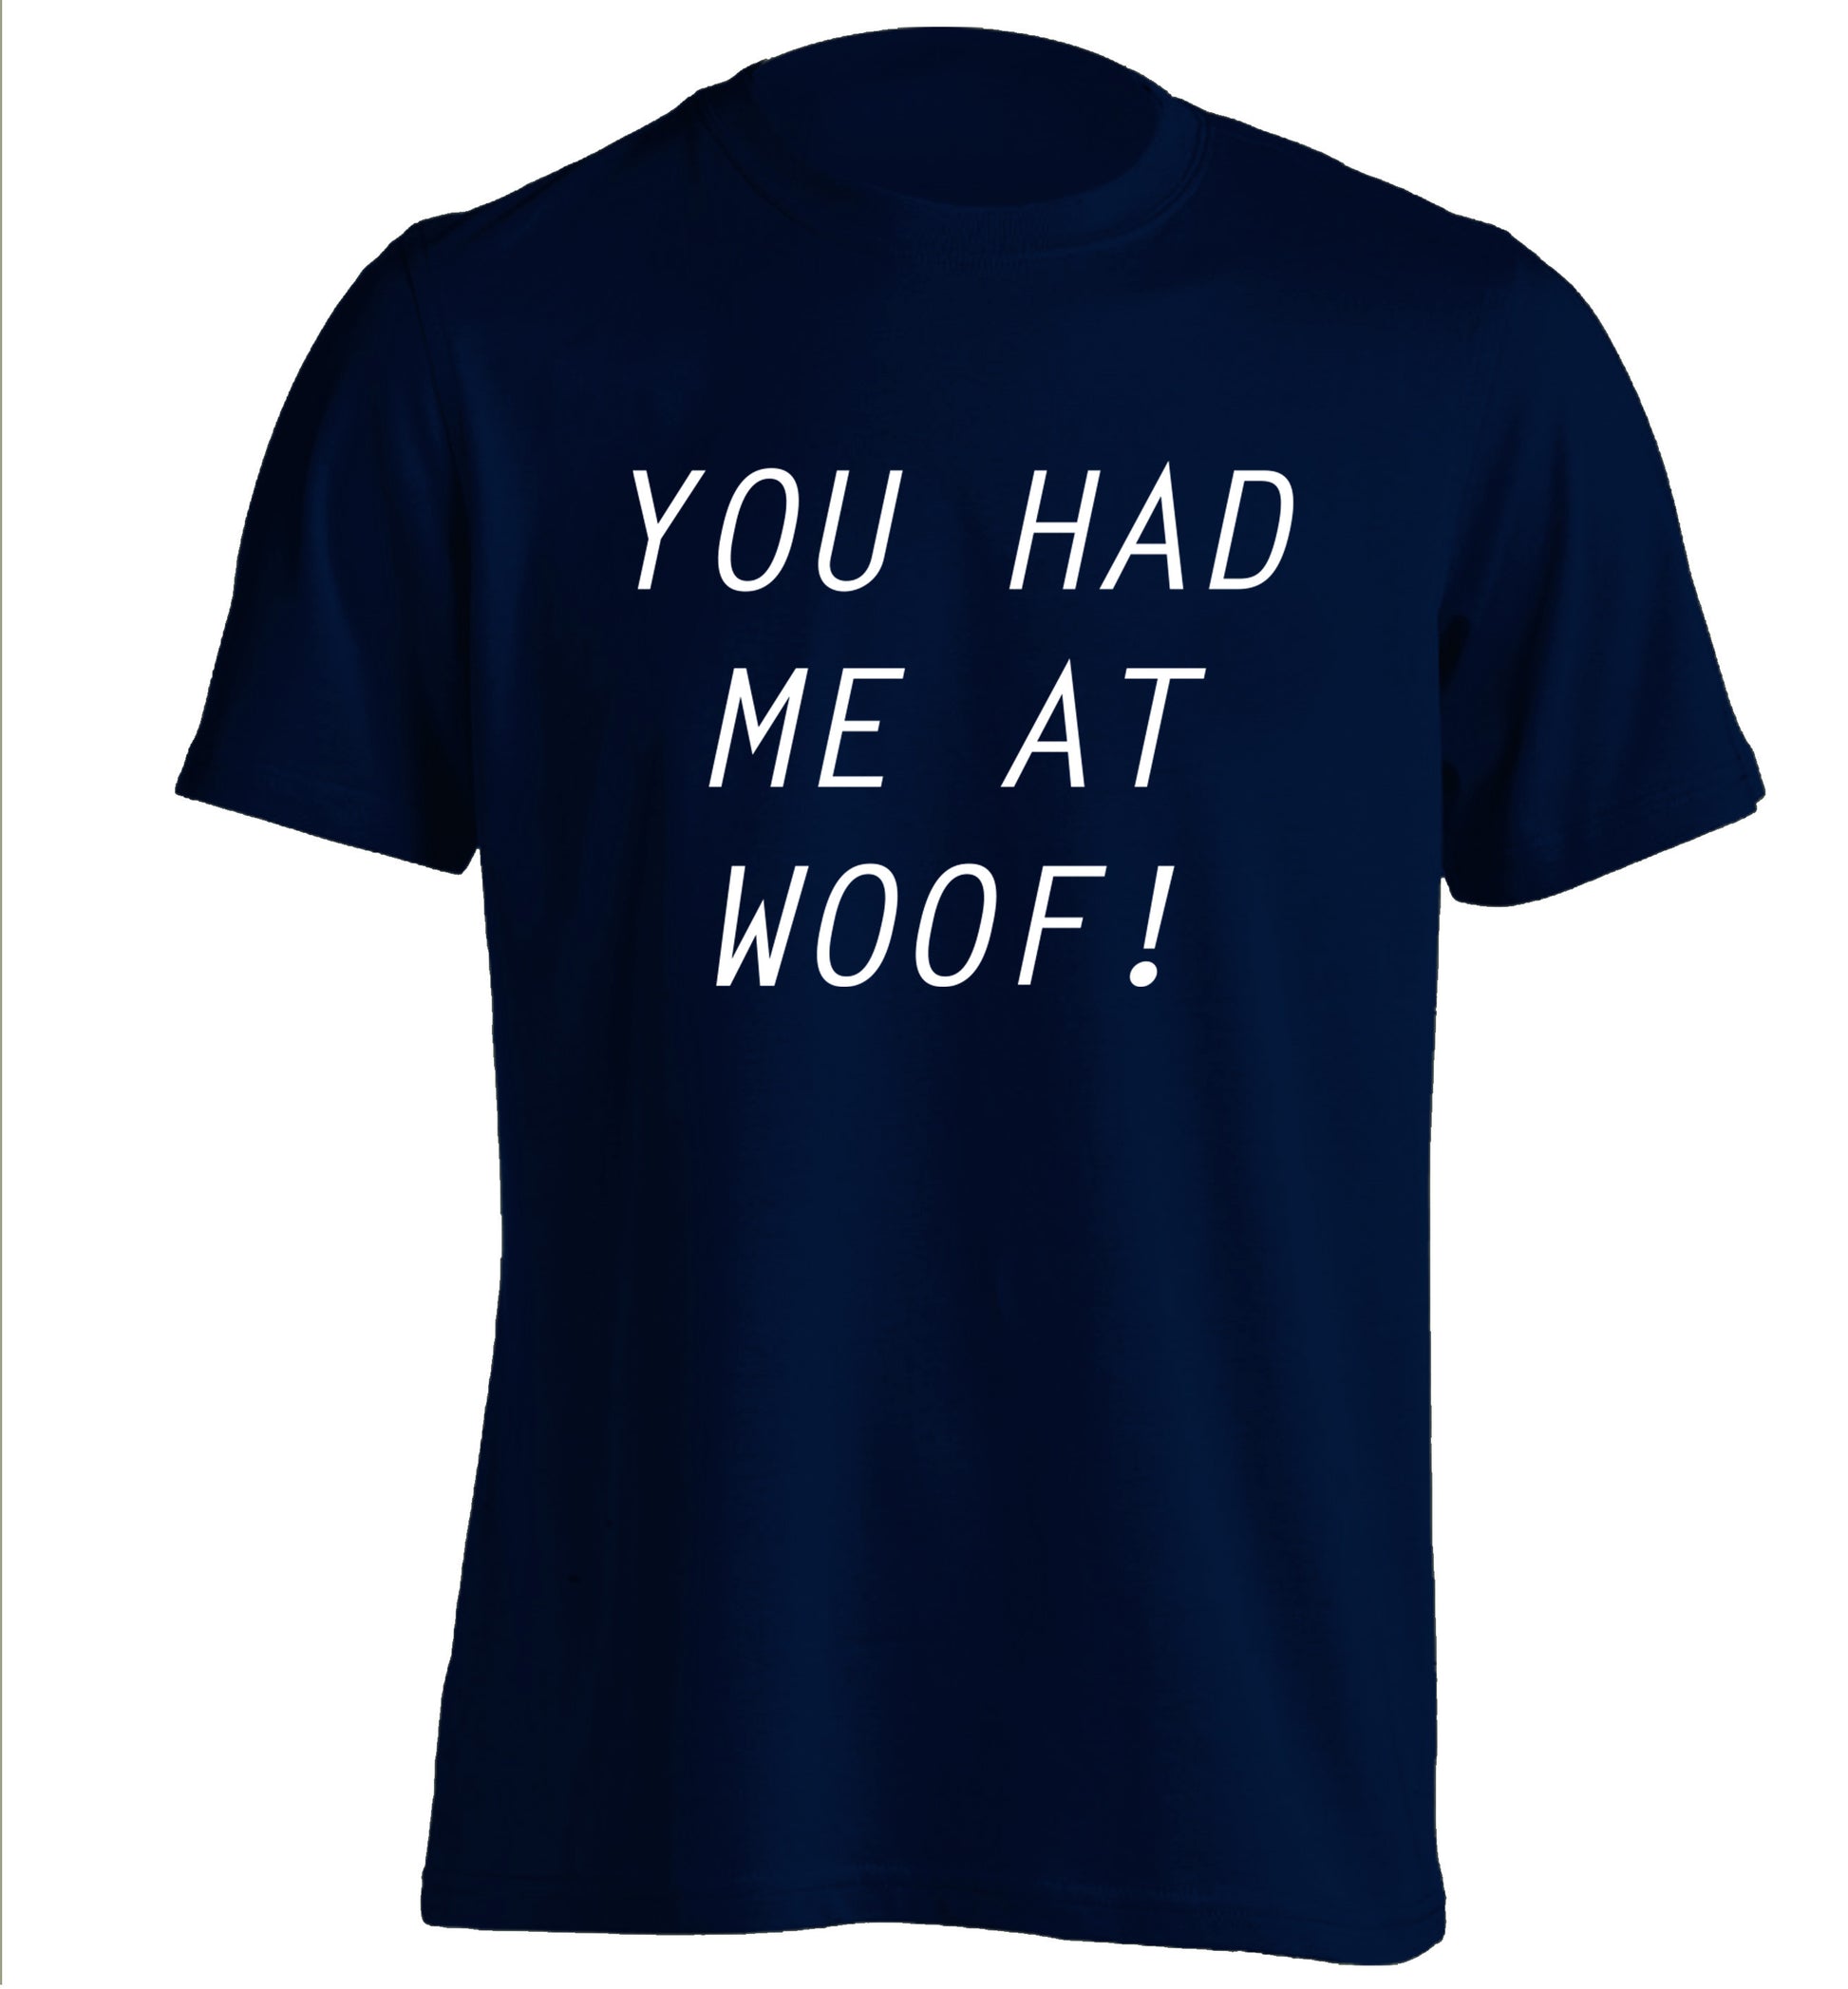 You had me at woof adults unisex navy Tshirt 2XL